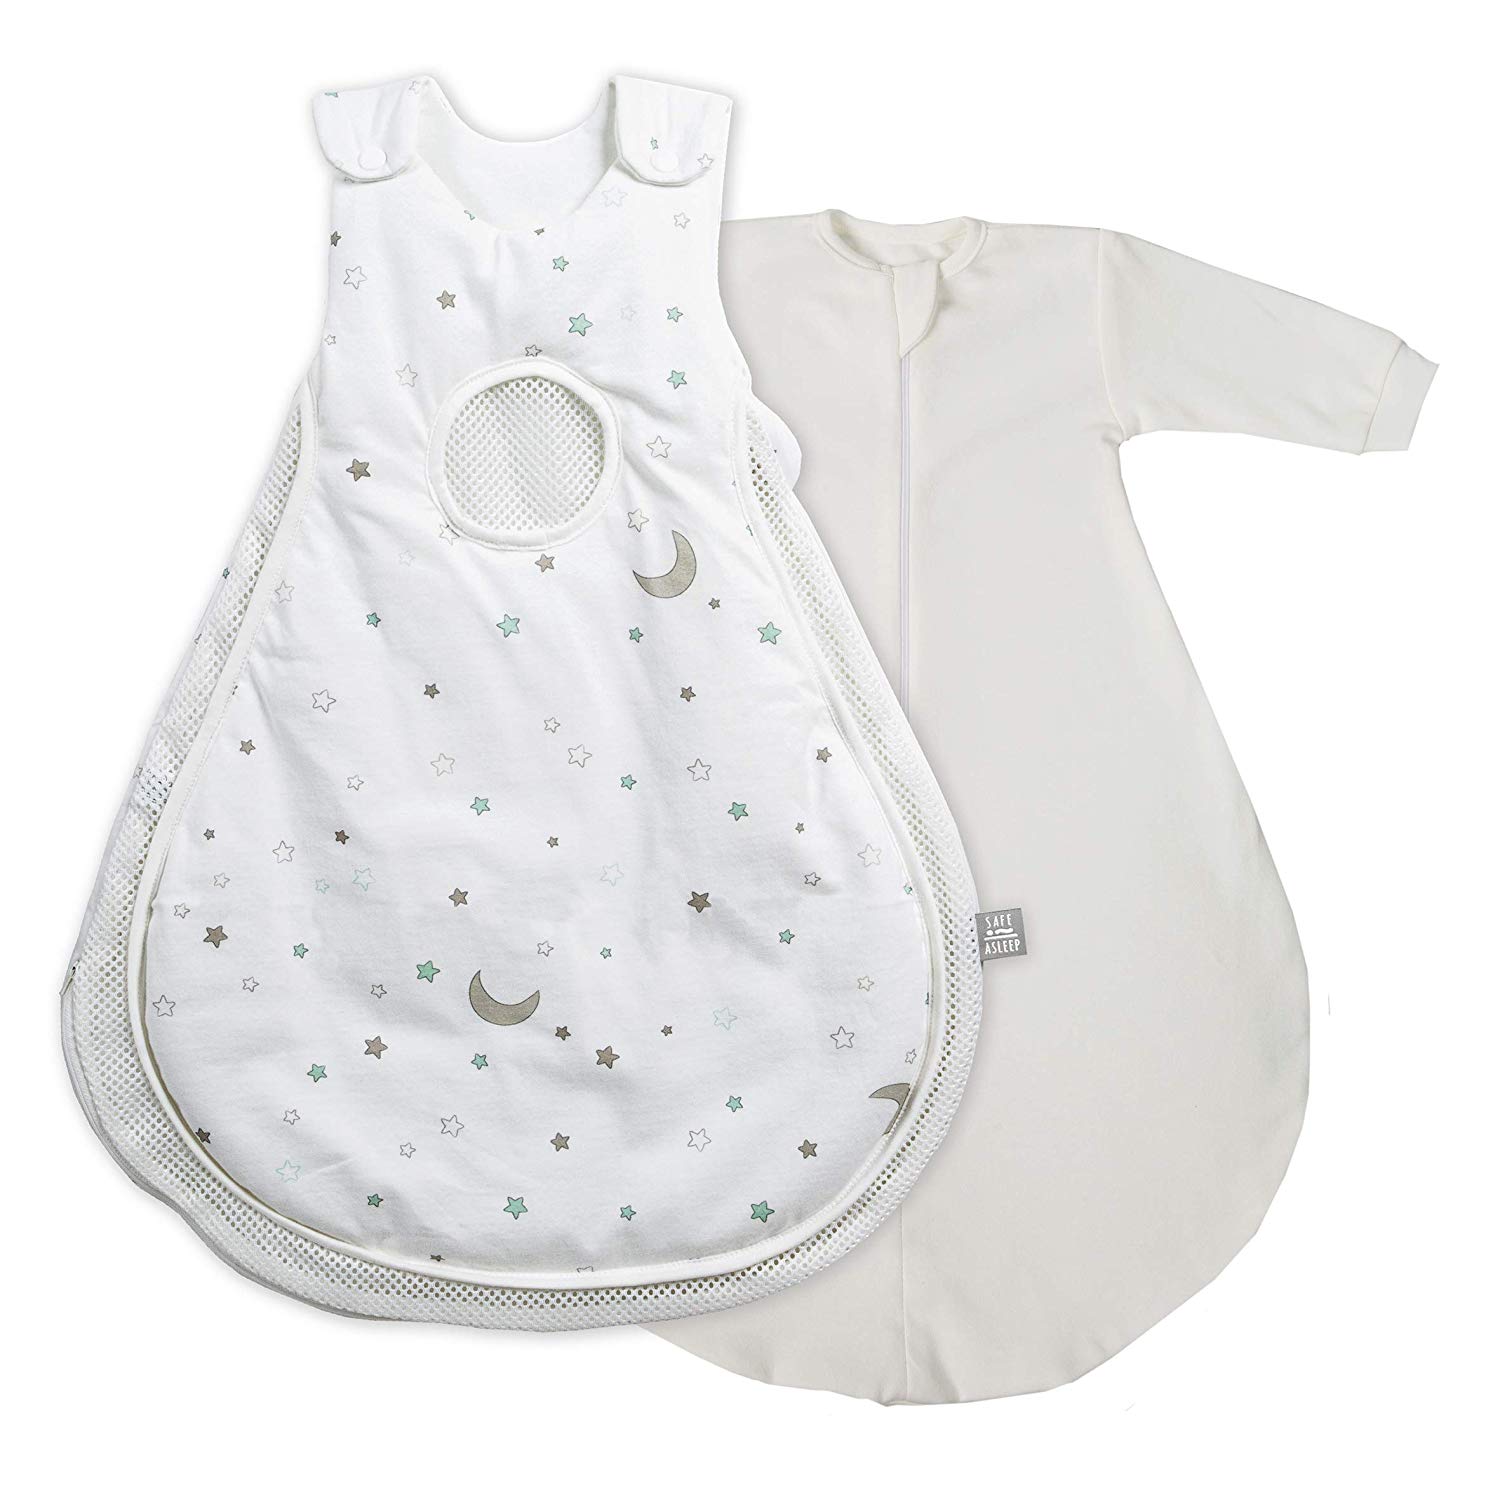 Roba safe asleep Air Plus Baby Sleeping Bag and Sleeping Bag \"Star Magic\", Size 56/62 cm, 100% Cotton, Soft Filling 100% Polyester, Mesh Inserts, Air Balance System